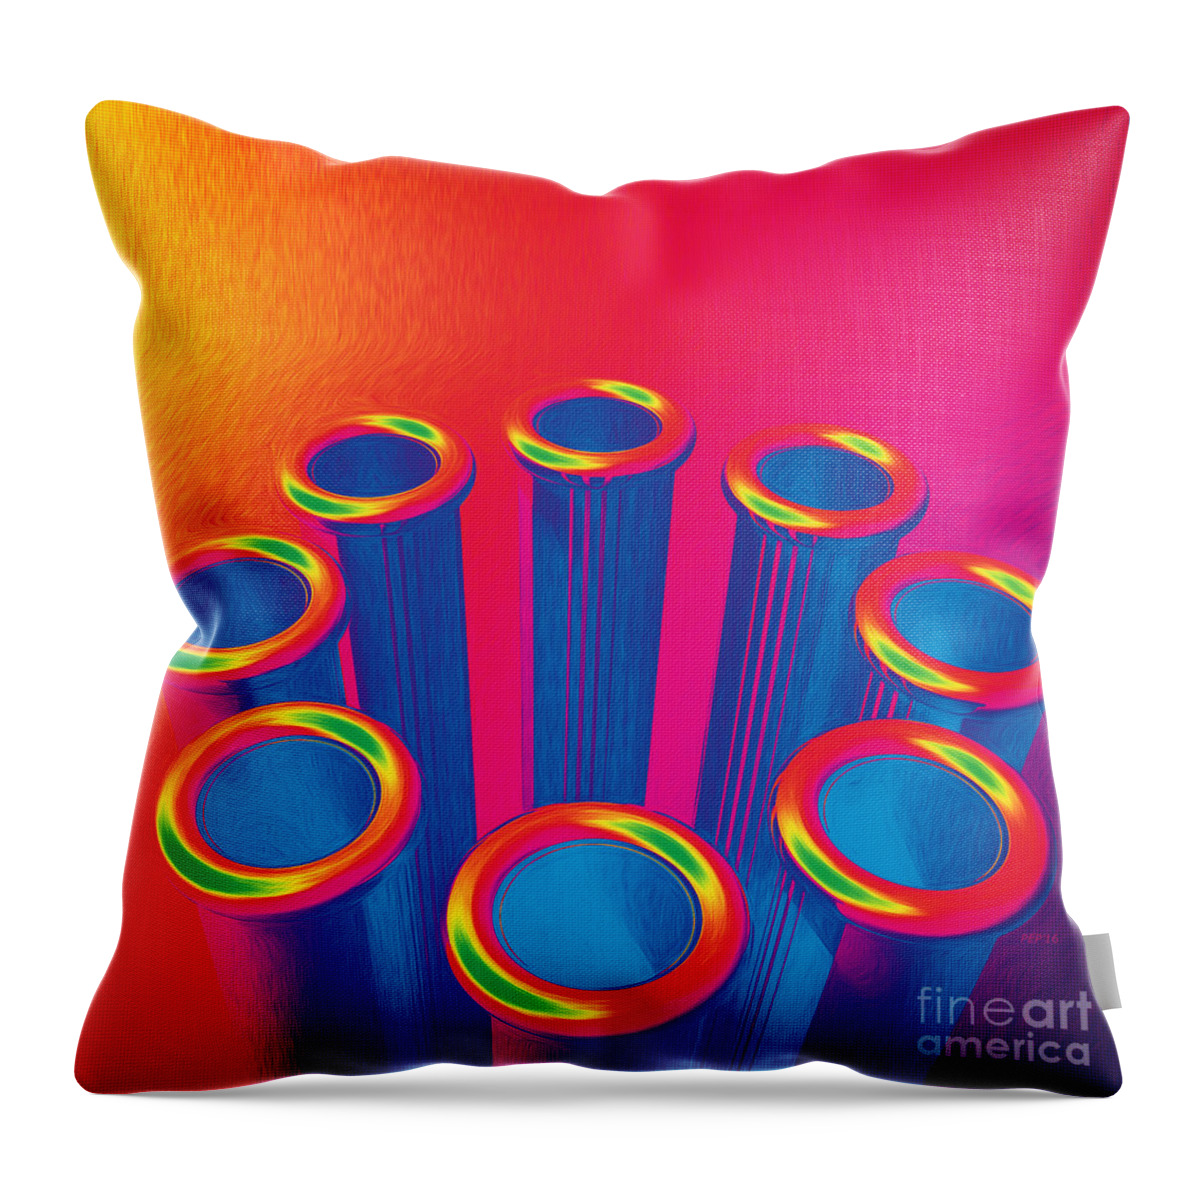 Pop Art Throw Pillow featuring the digital art Colorful Pop Art Cylinders by Phil Perkins